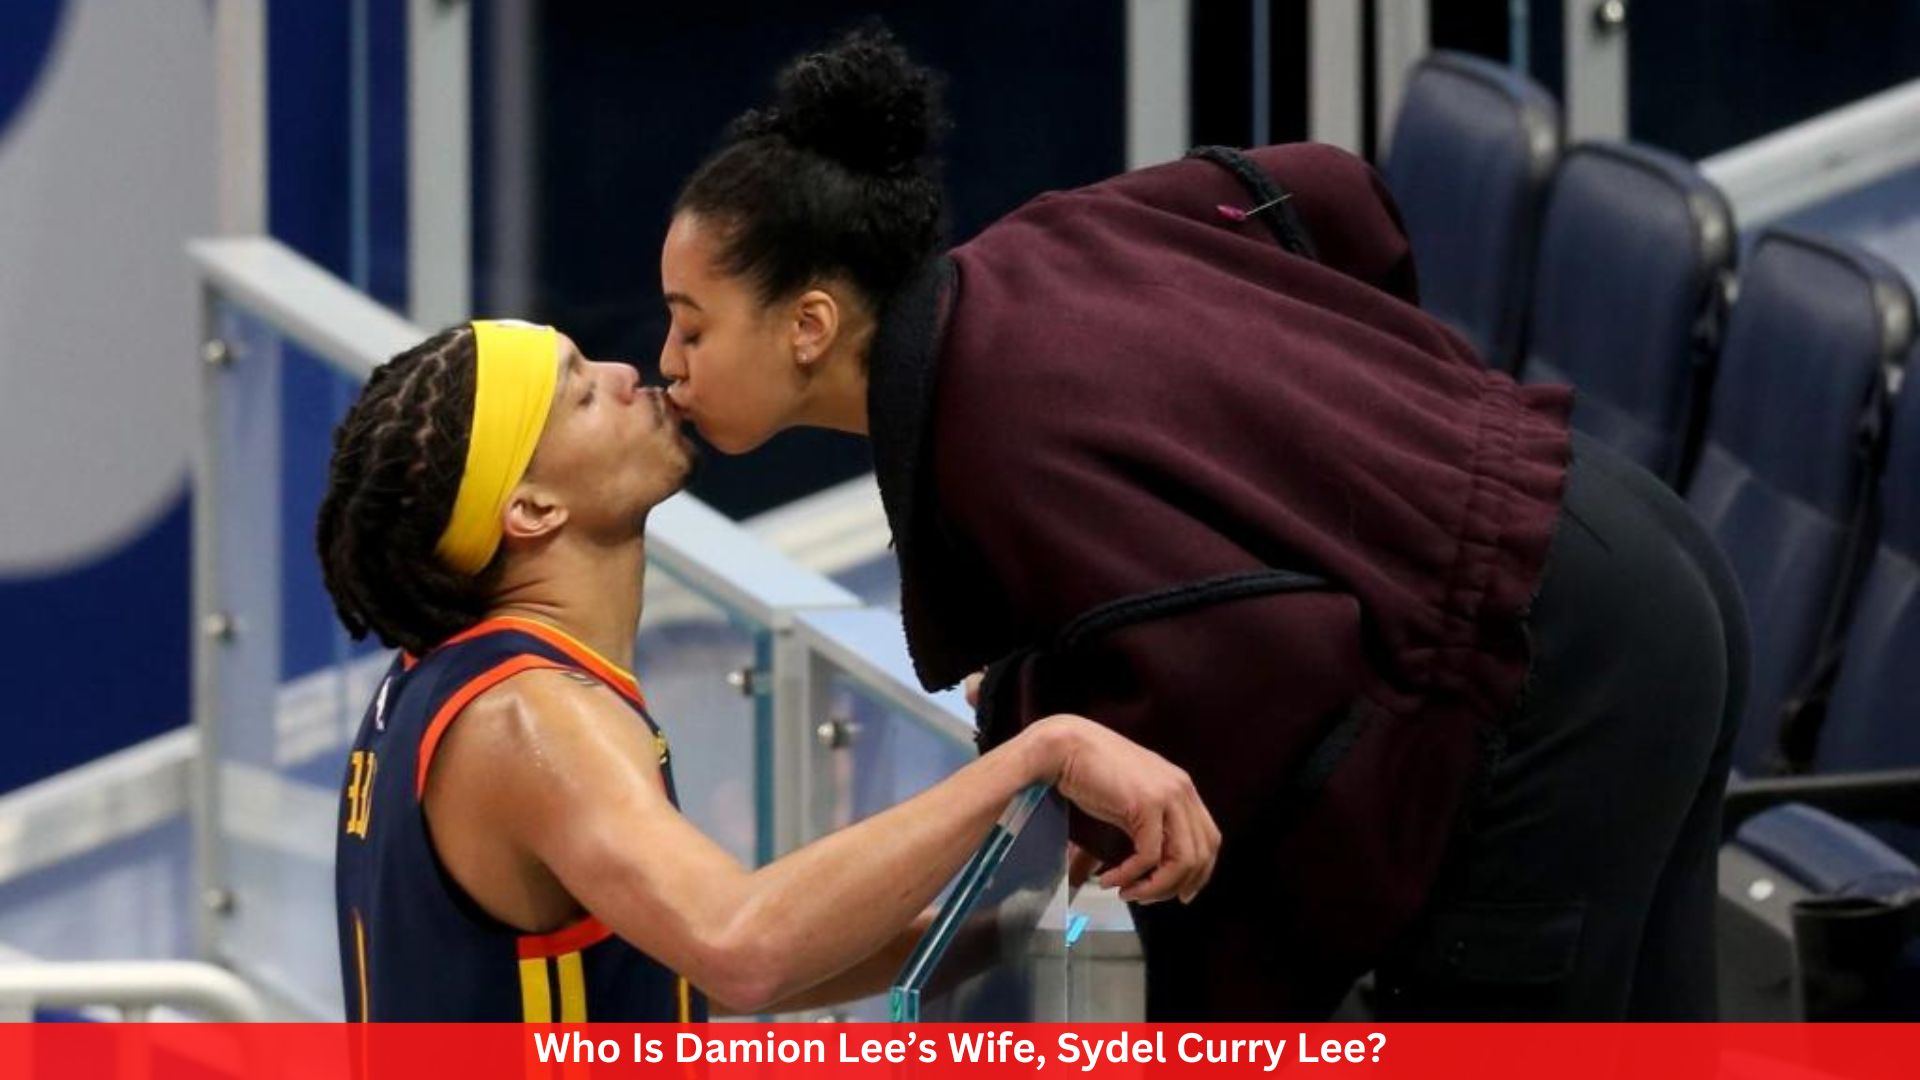 Who Is Damion Lee’s Wife, Sydel Curry Lee?